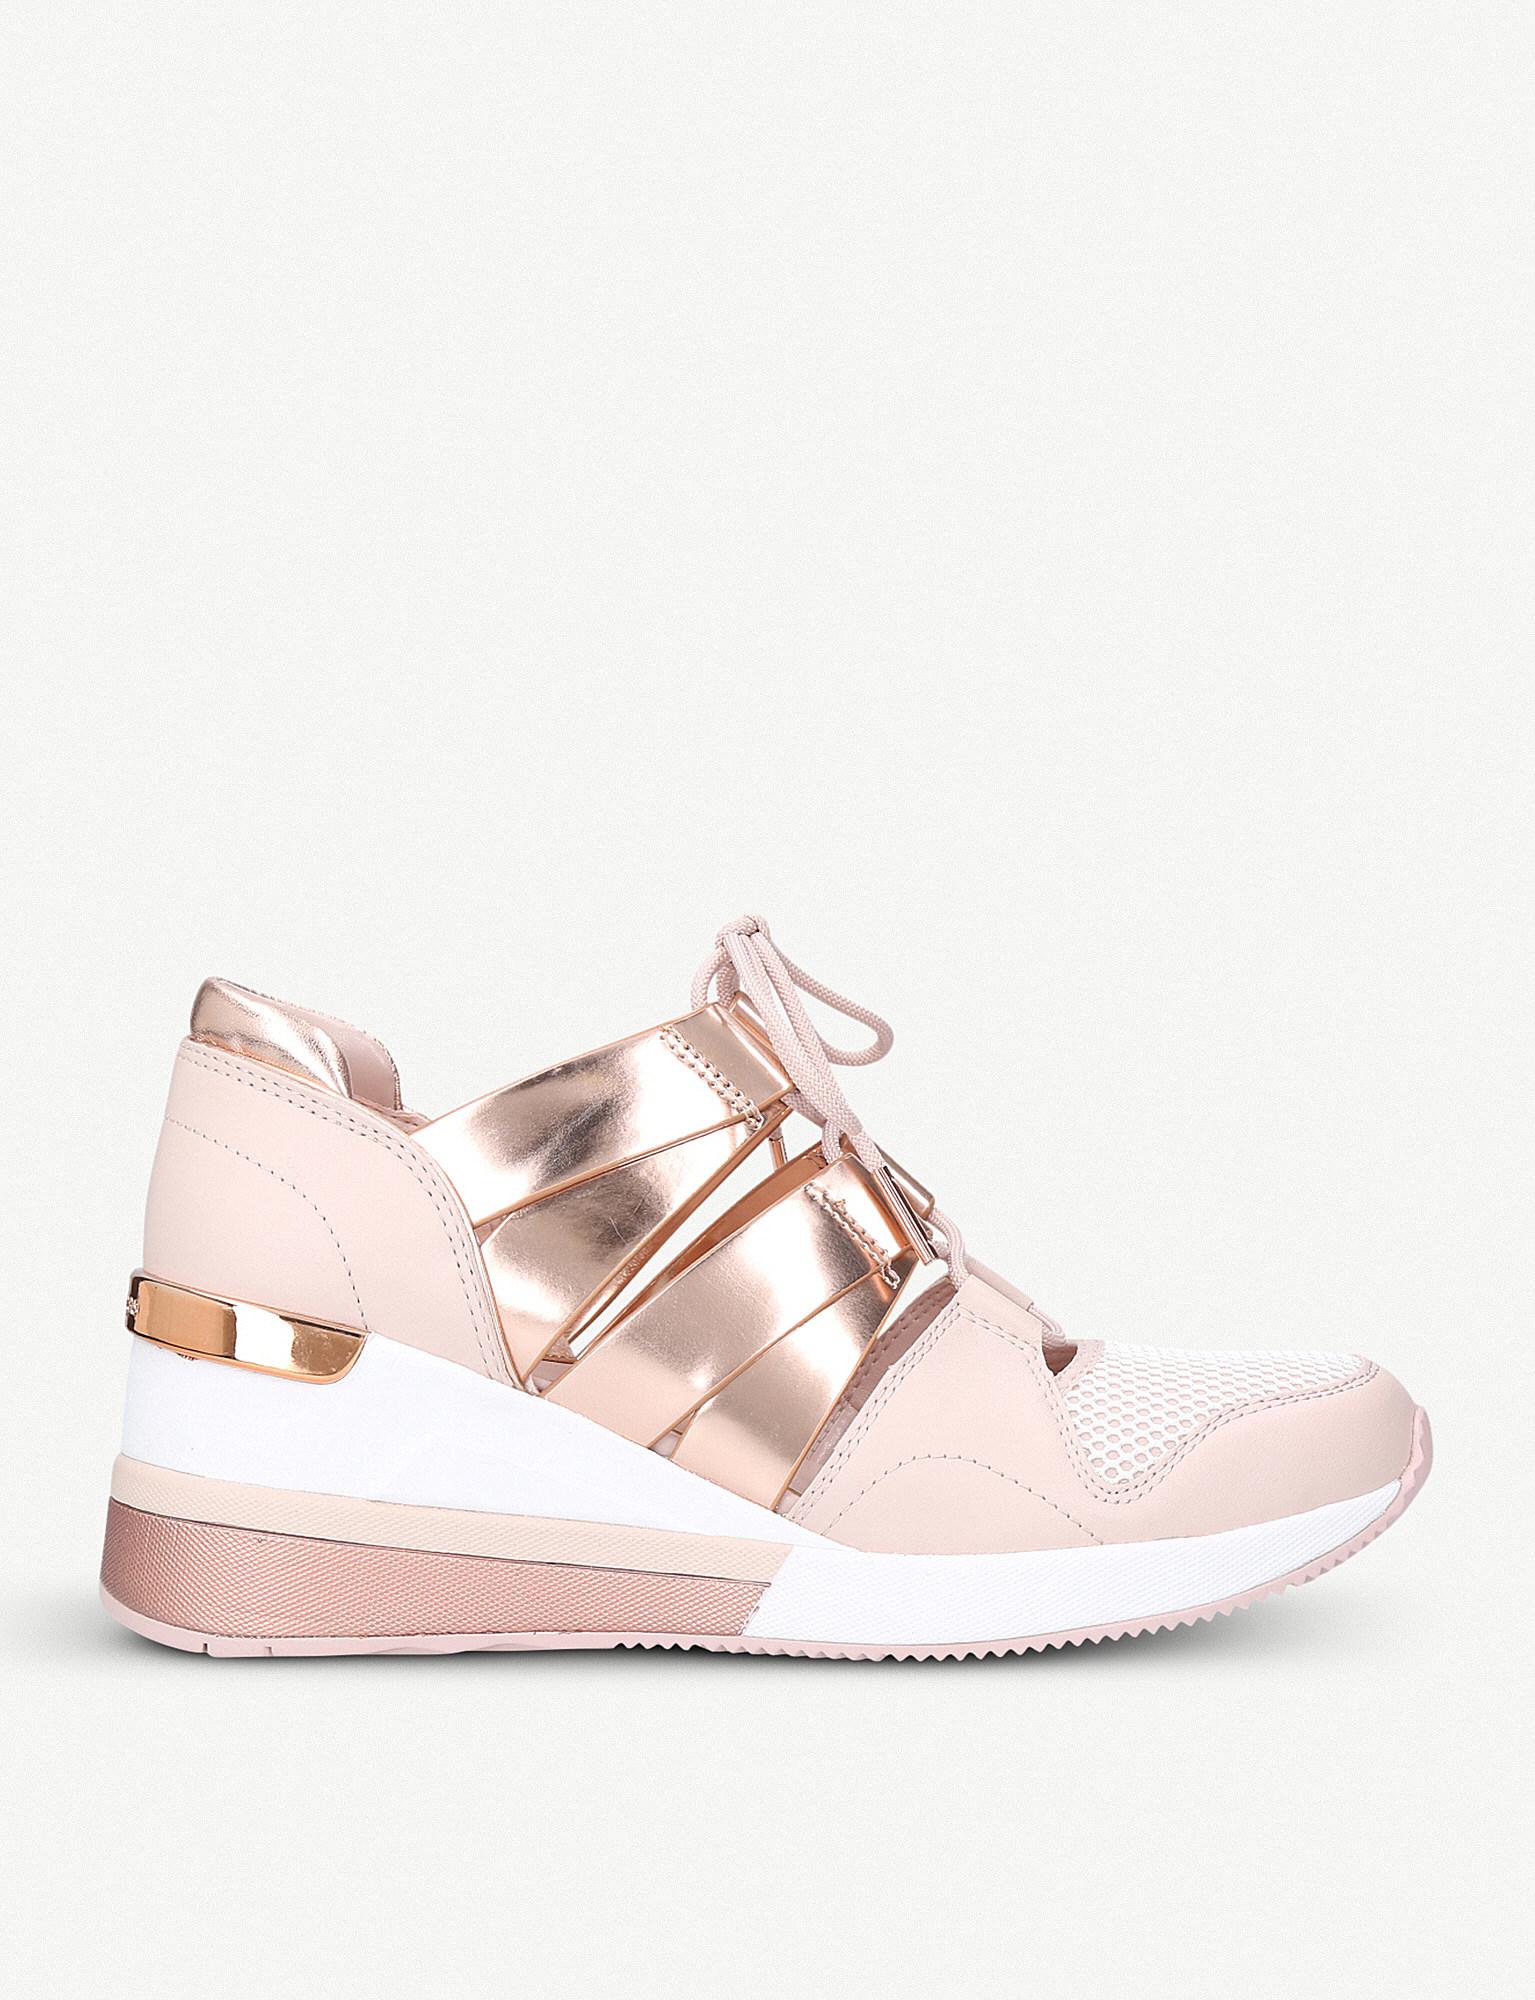 Michael Kors Sneakers Beckett Shop Discounted, 44% OFF | gioithieuxe.vn